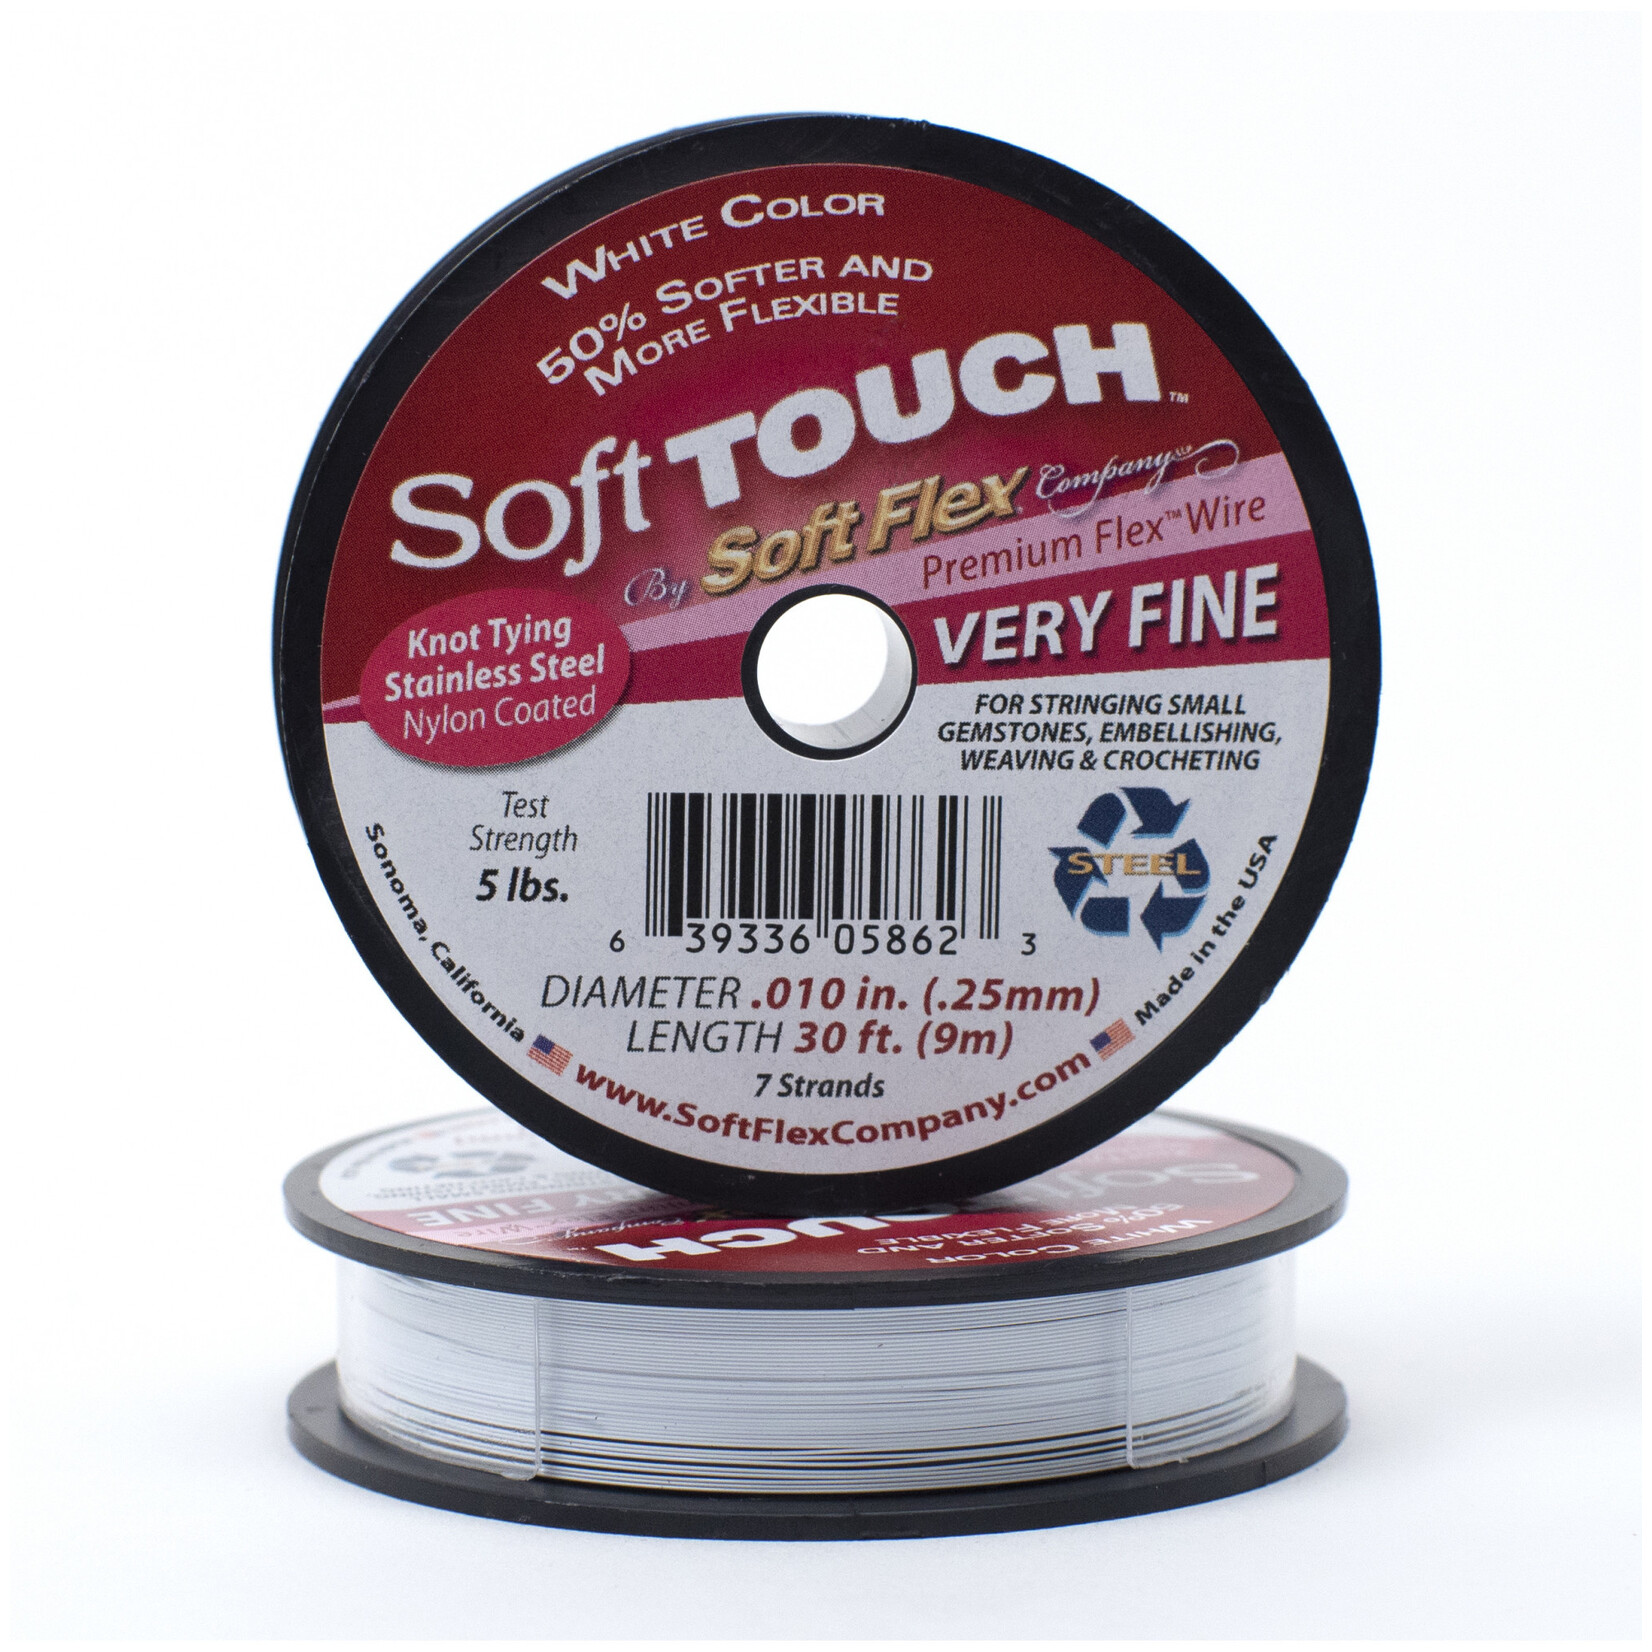 Softflex SoftTouch Very Fine White Beading Wire - .010in Diameter, 30 feet